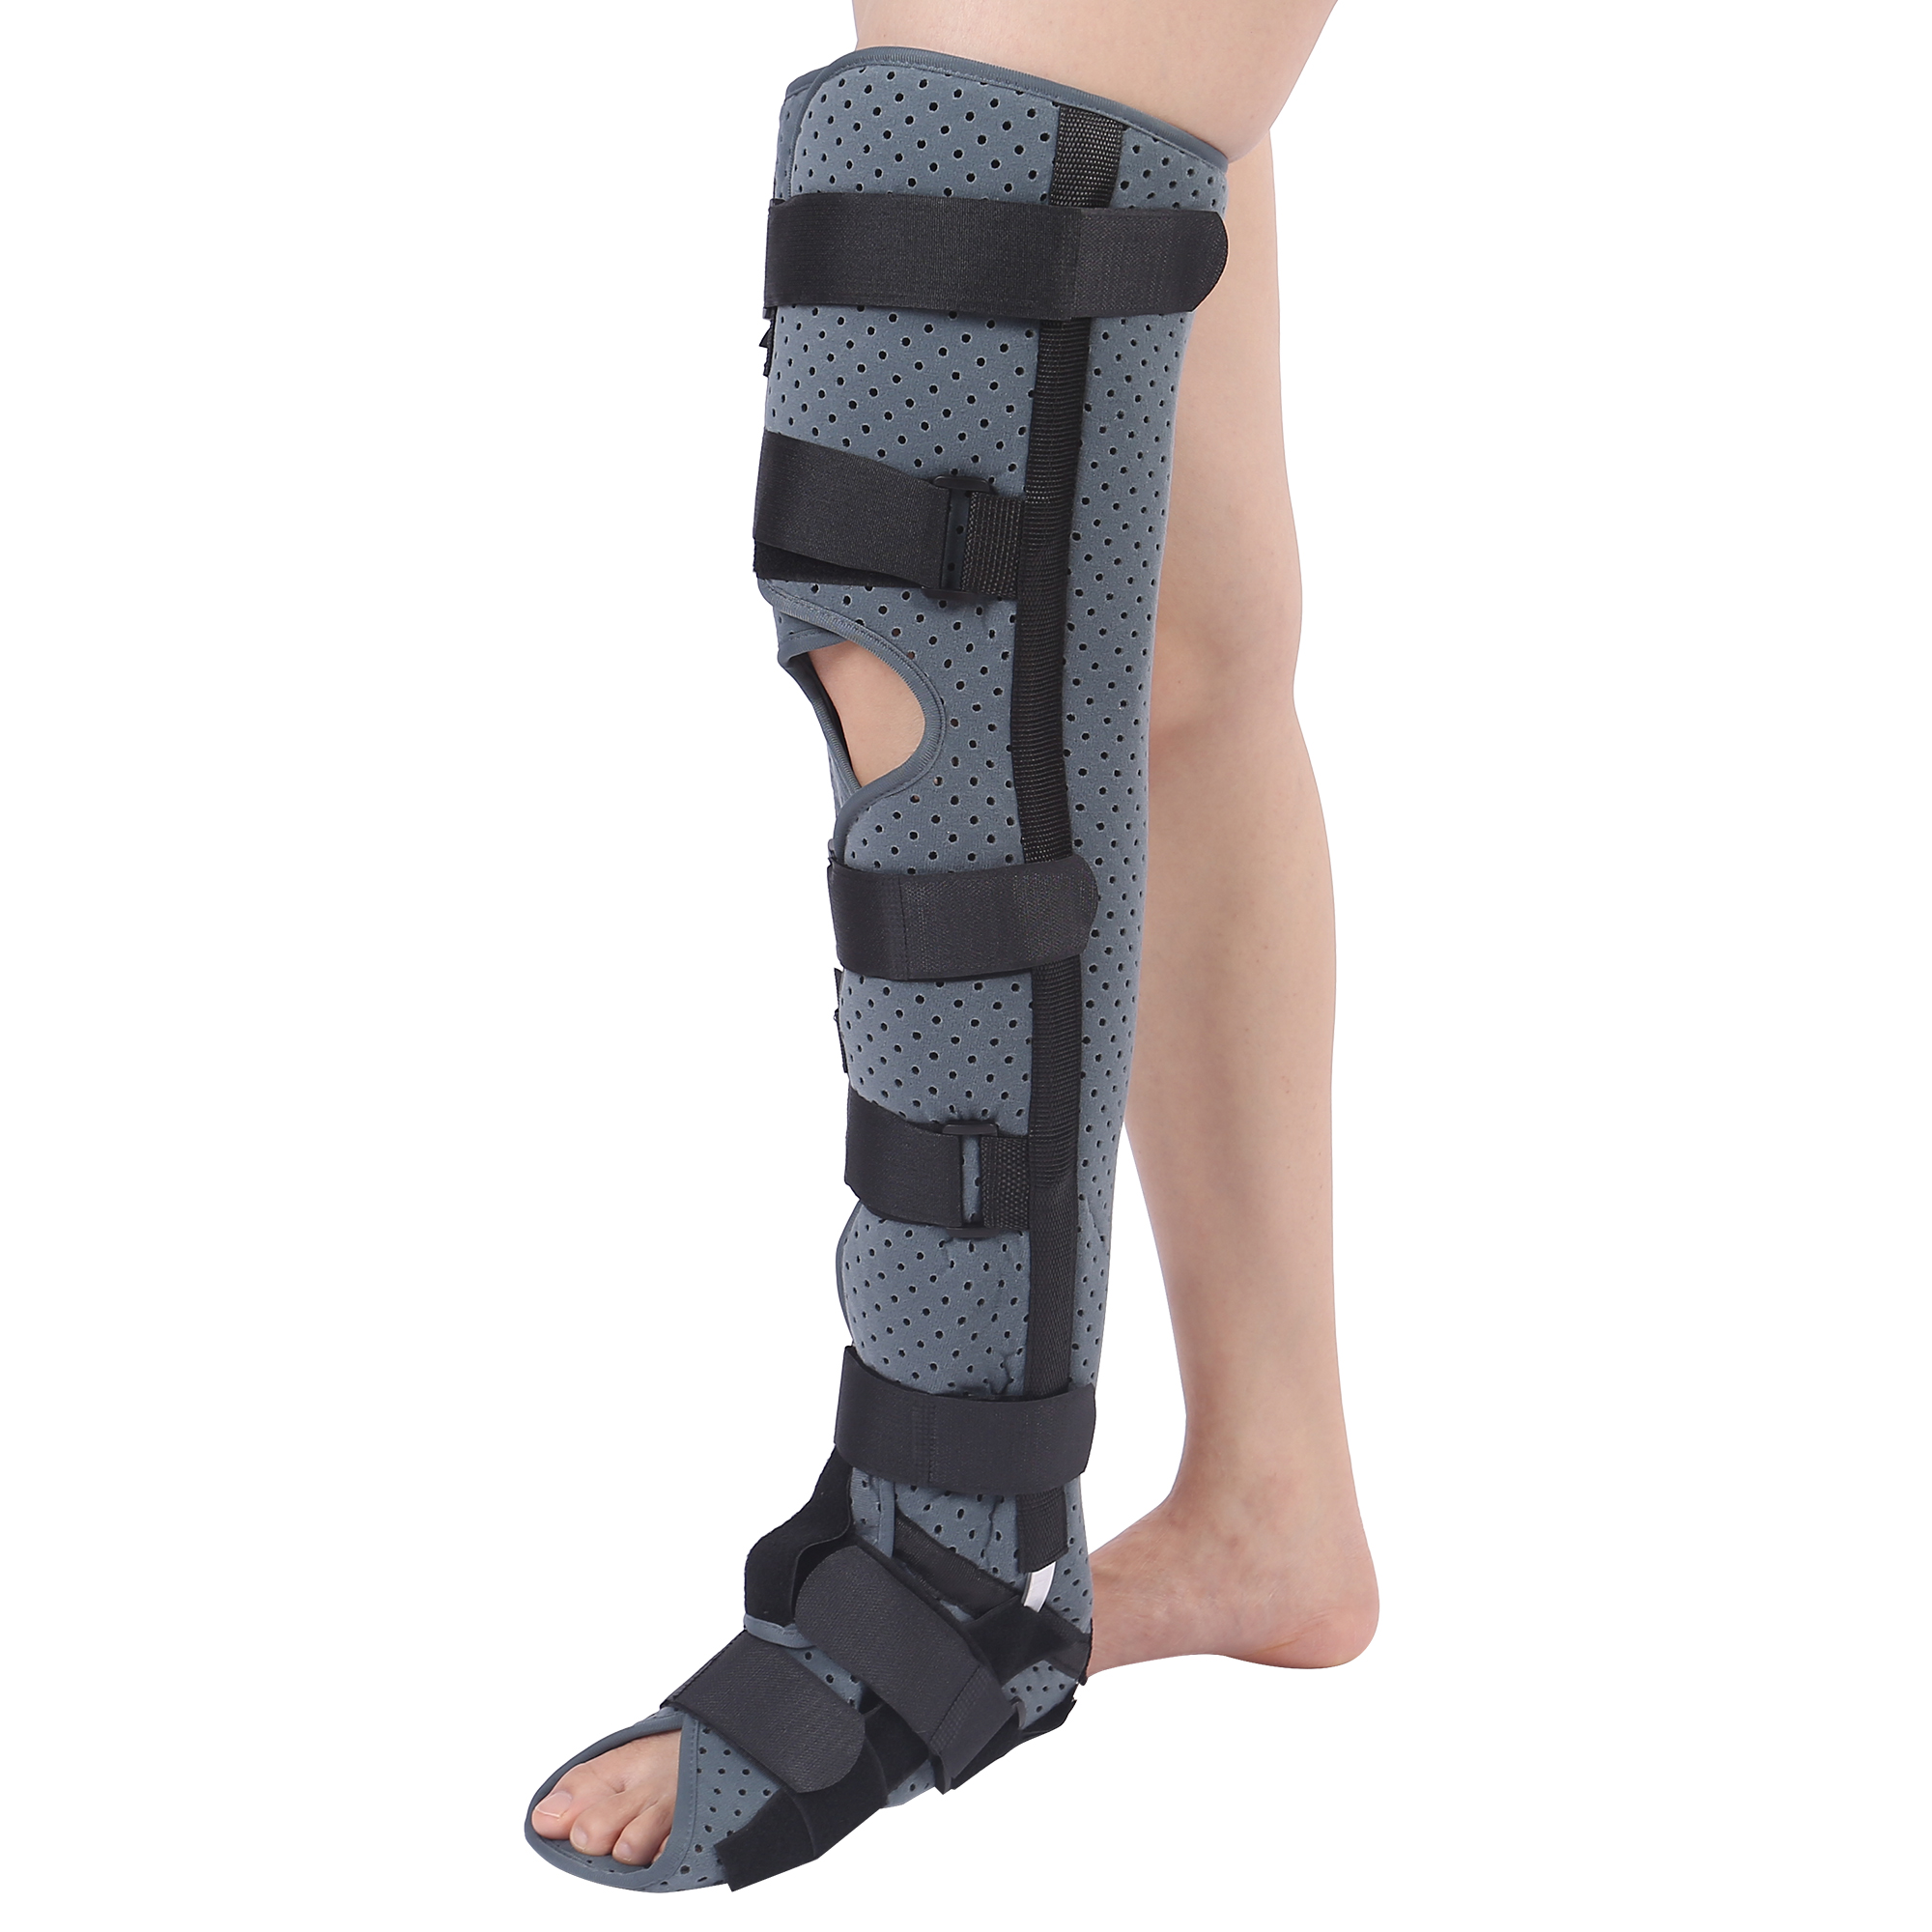 Fixed fracture devices help with good ventilation and sufficient fixation straps for ankle and tibial fractures